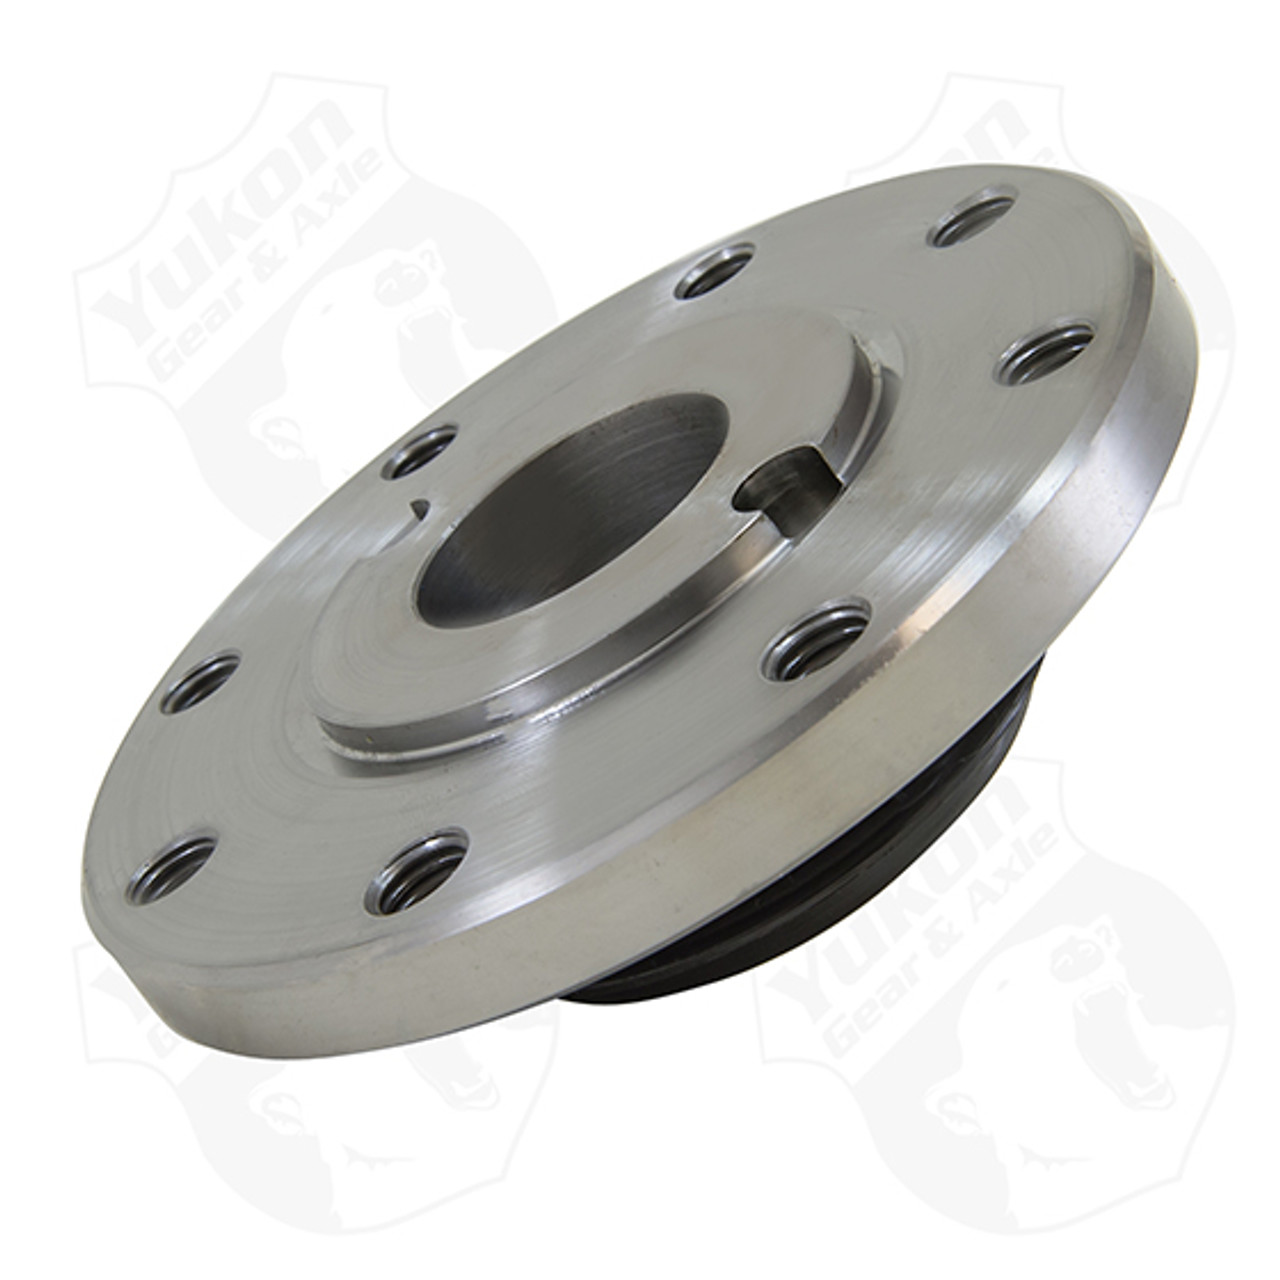 Yukon flange yoke for Ford 10.25" and 10.5" with short spline pinion